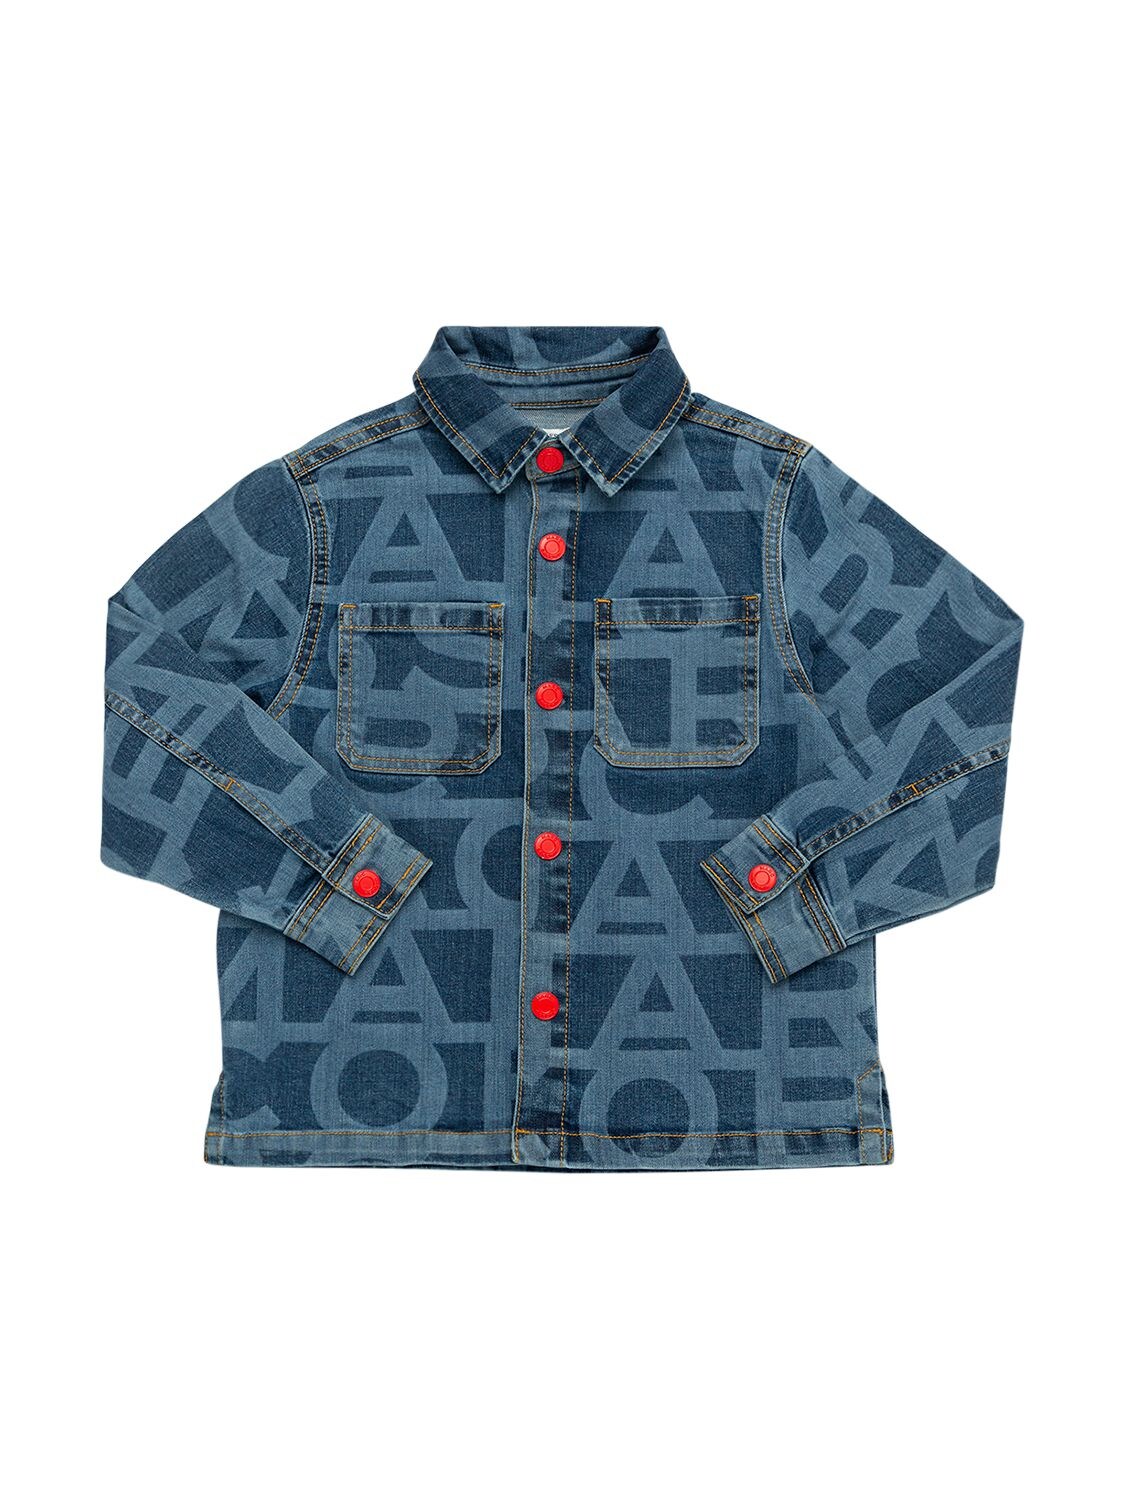 Marc Jacobs (the) Kids' All Over Print Cotton Denim Jacket